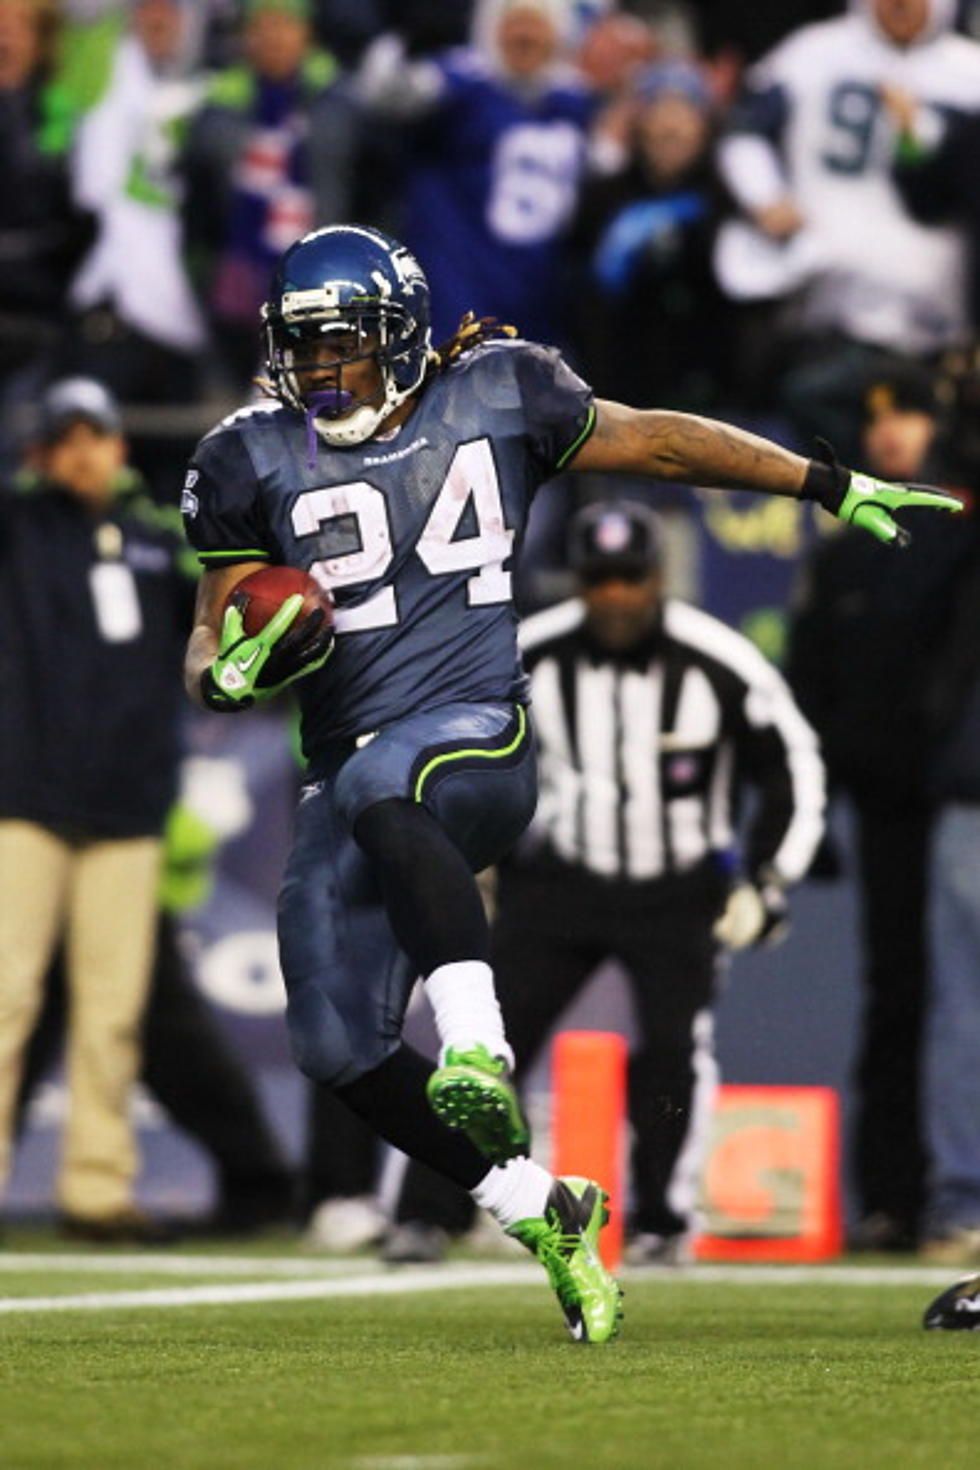 Seahawks In The Pro Bowl: Will You Be Watching? [Poll]